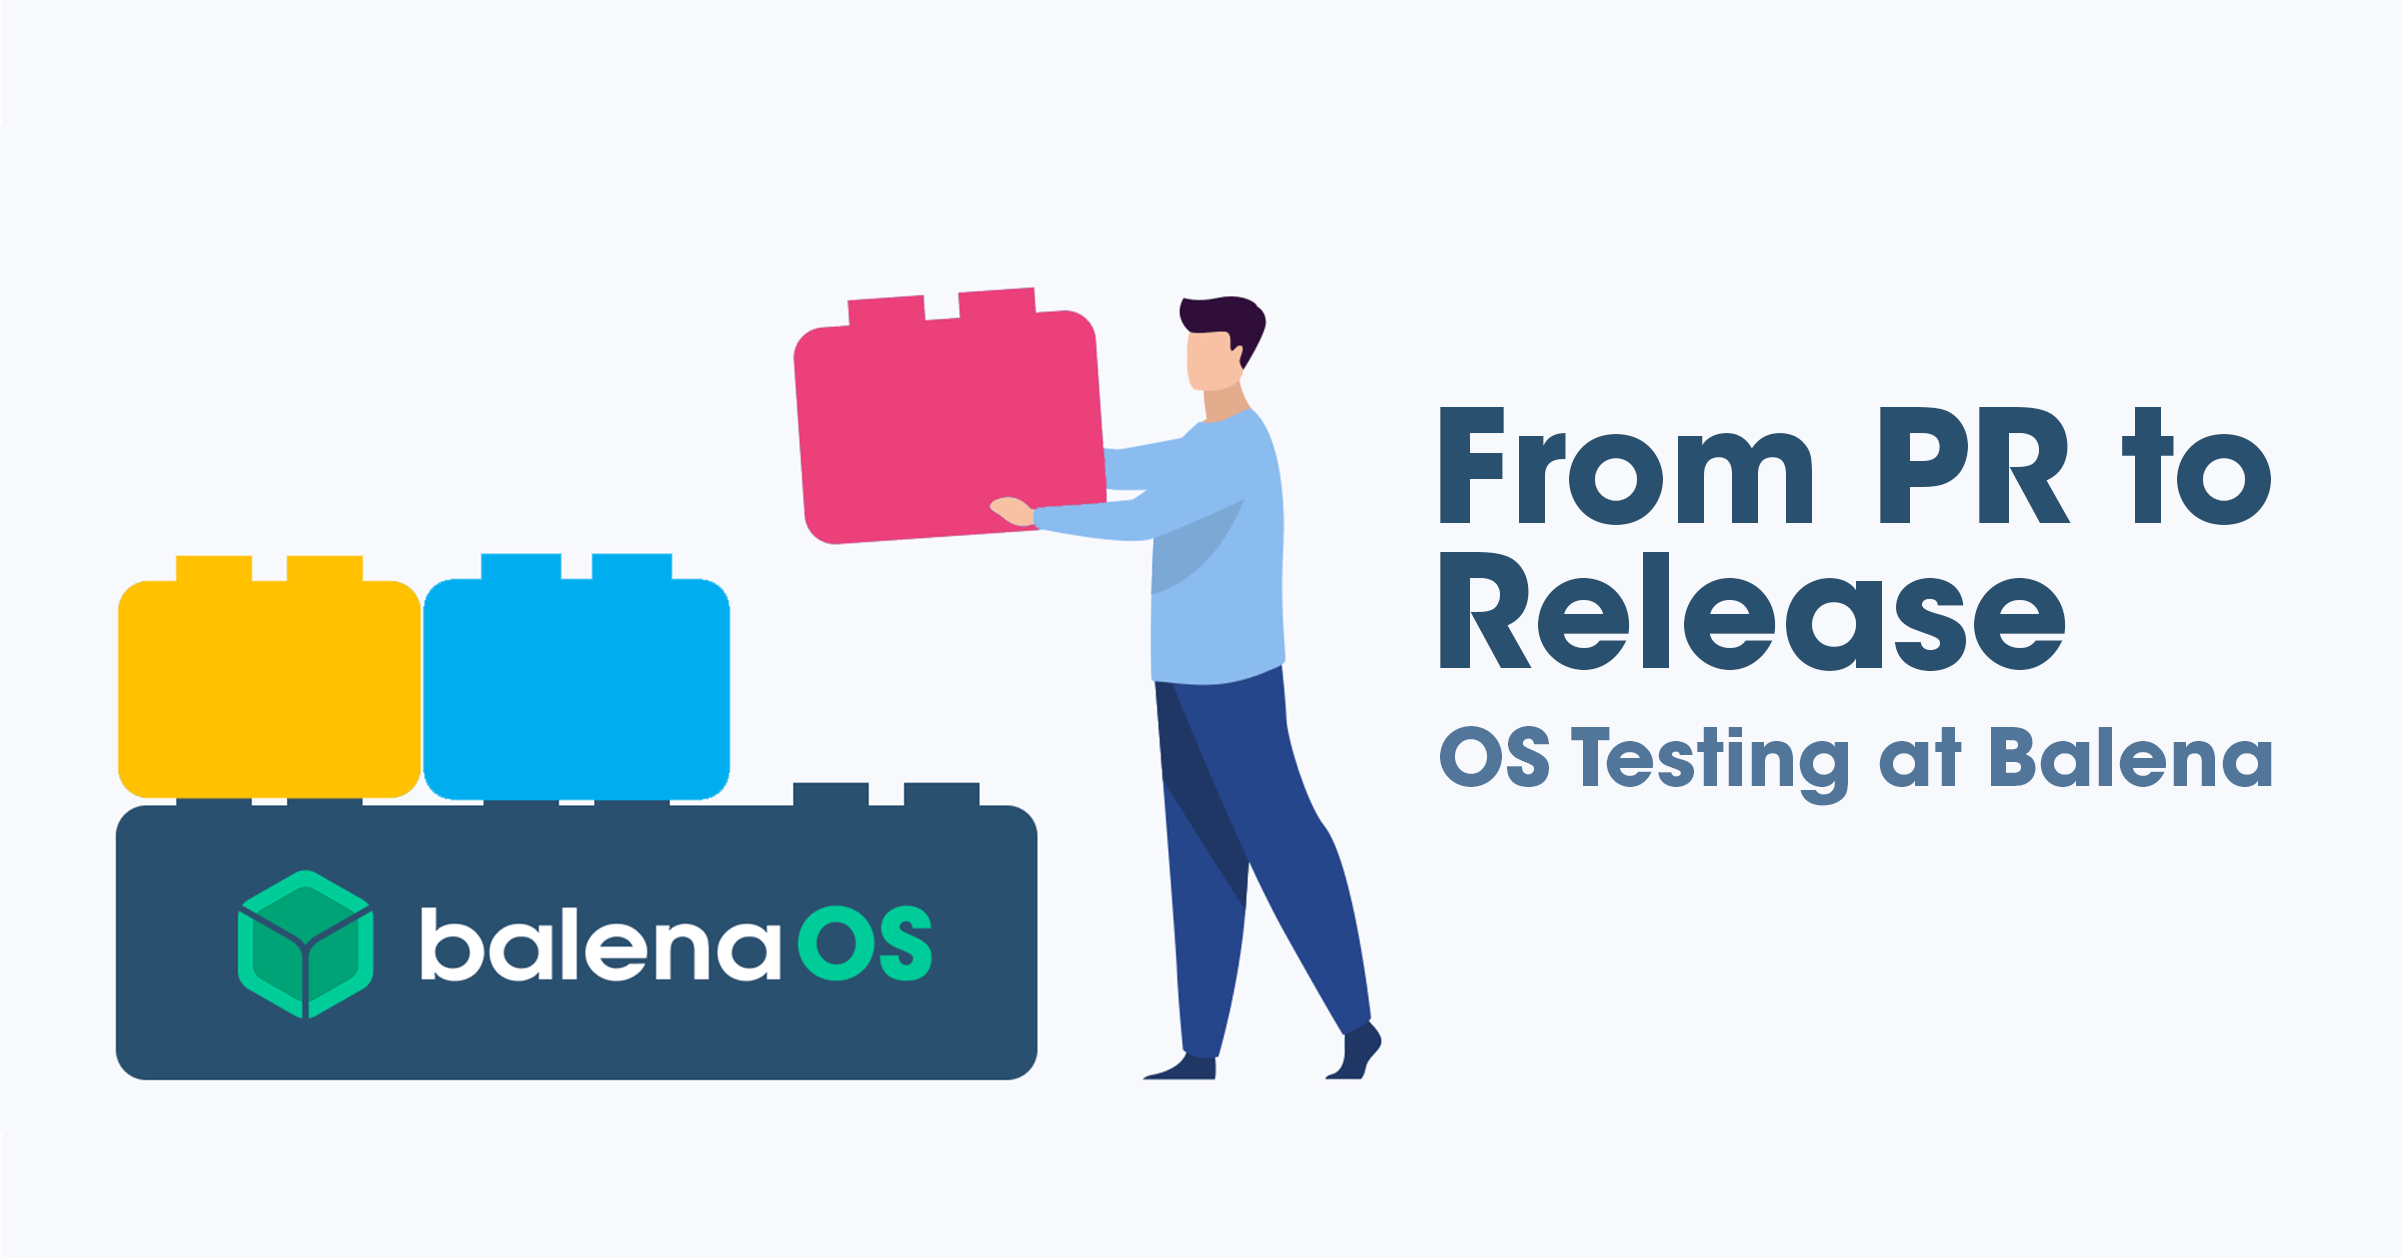 From PR to Release; OS Testing at balena